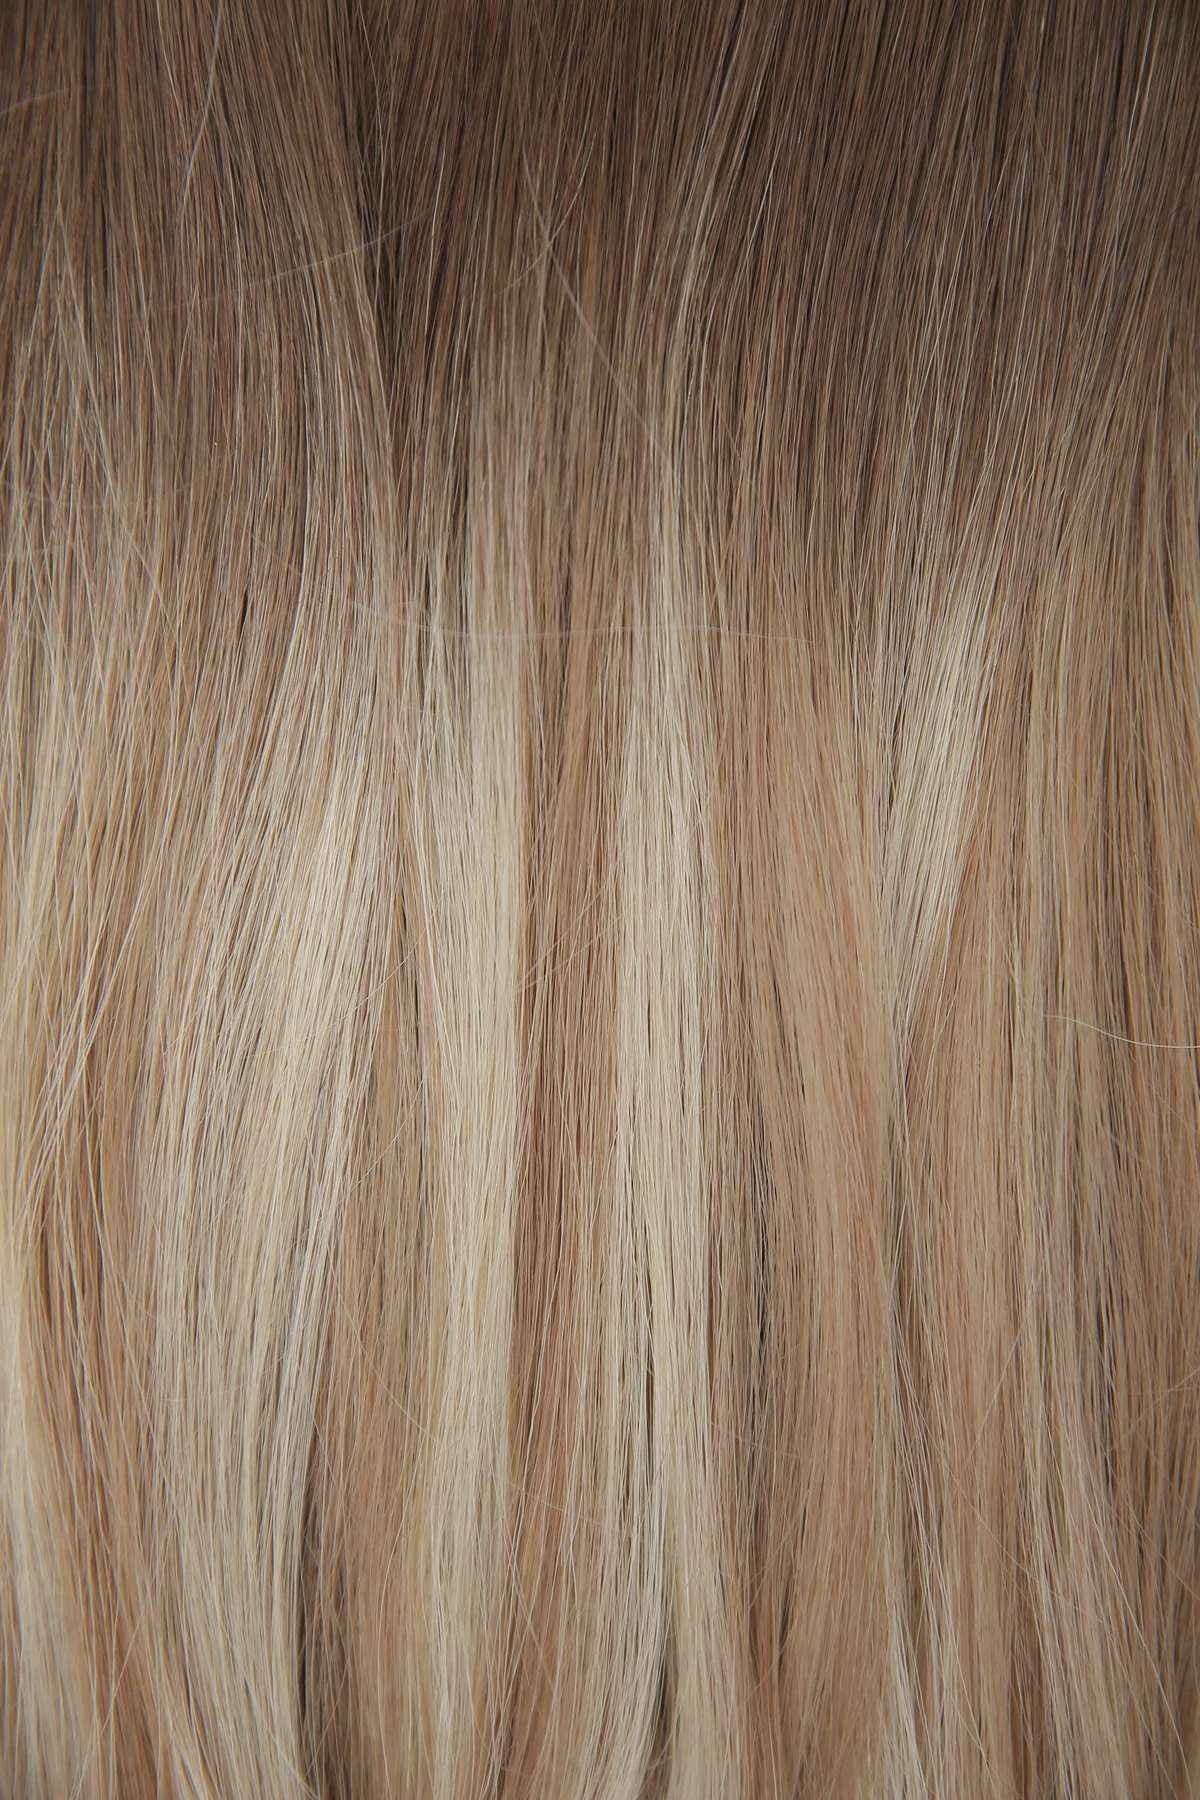 #Iced Coffee Balayage Genius Hair Weft Extensions